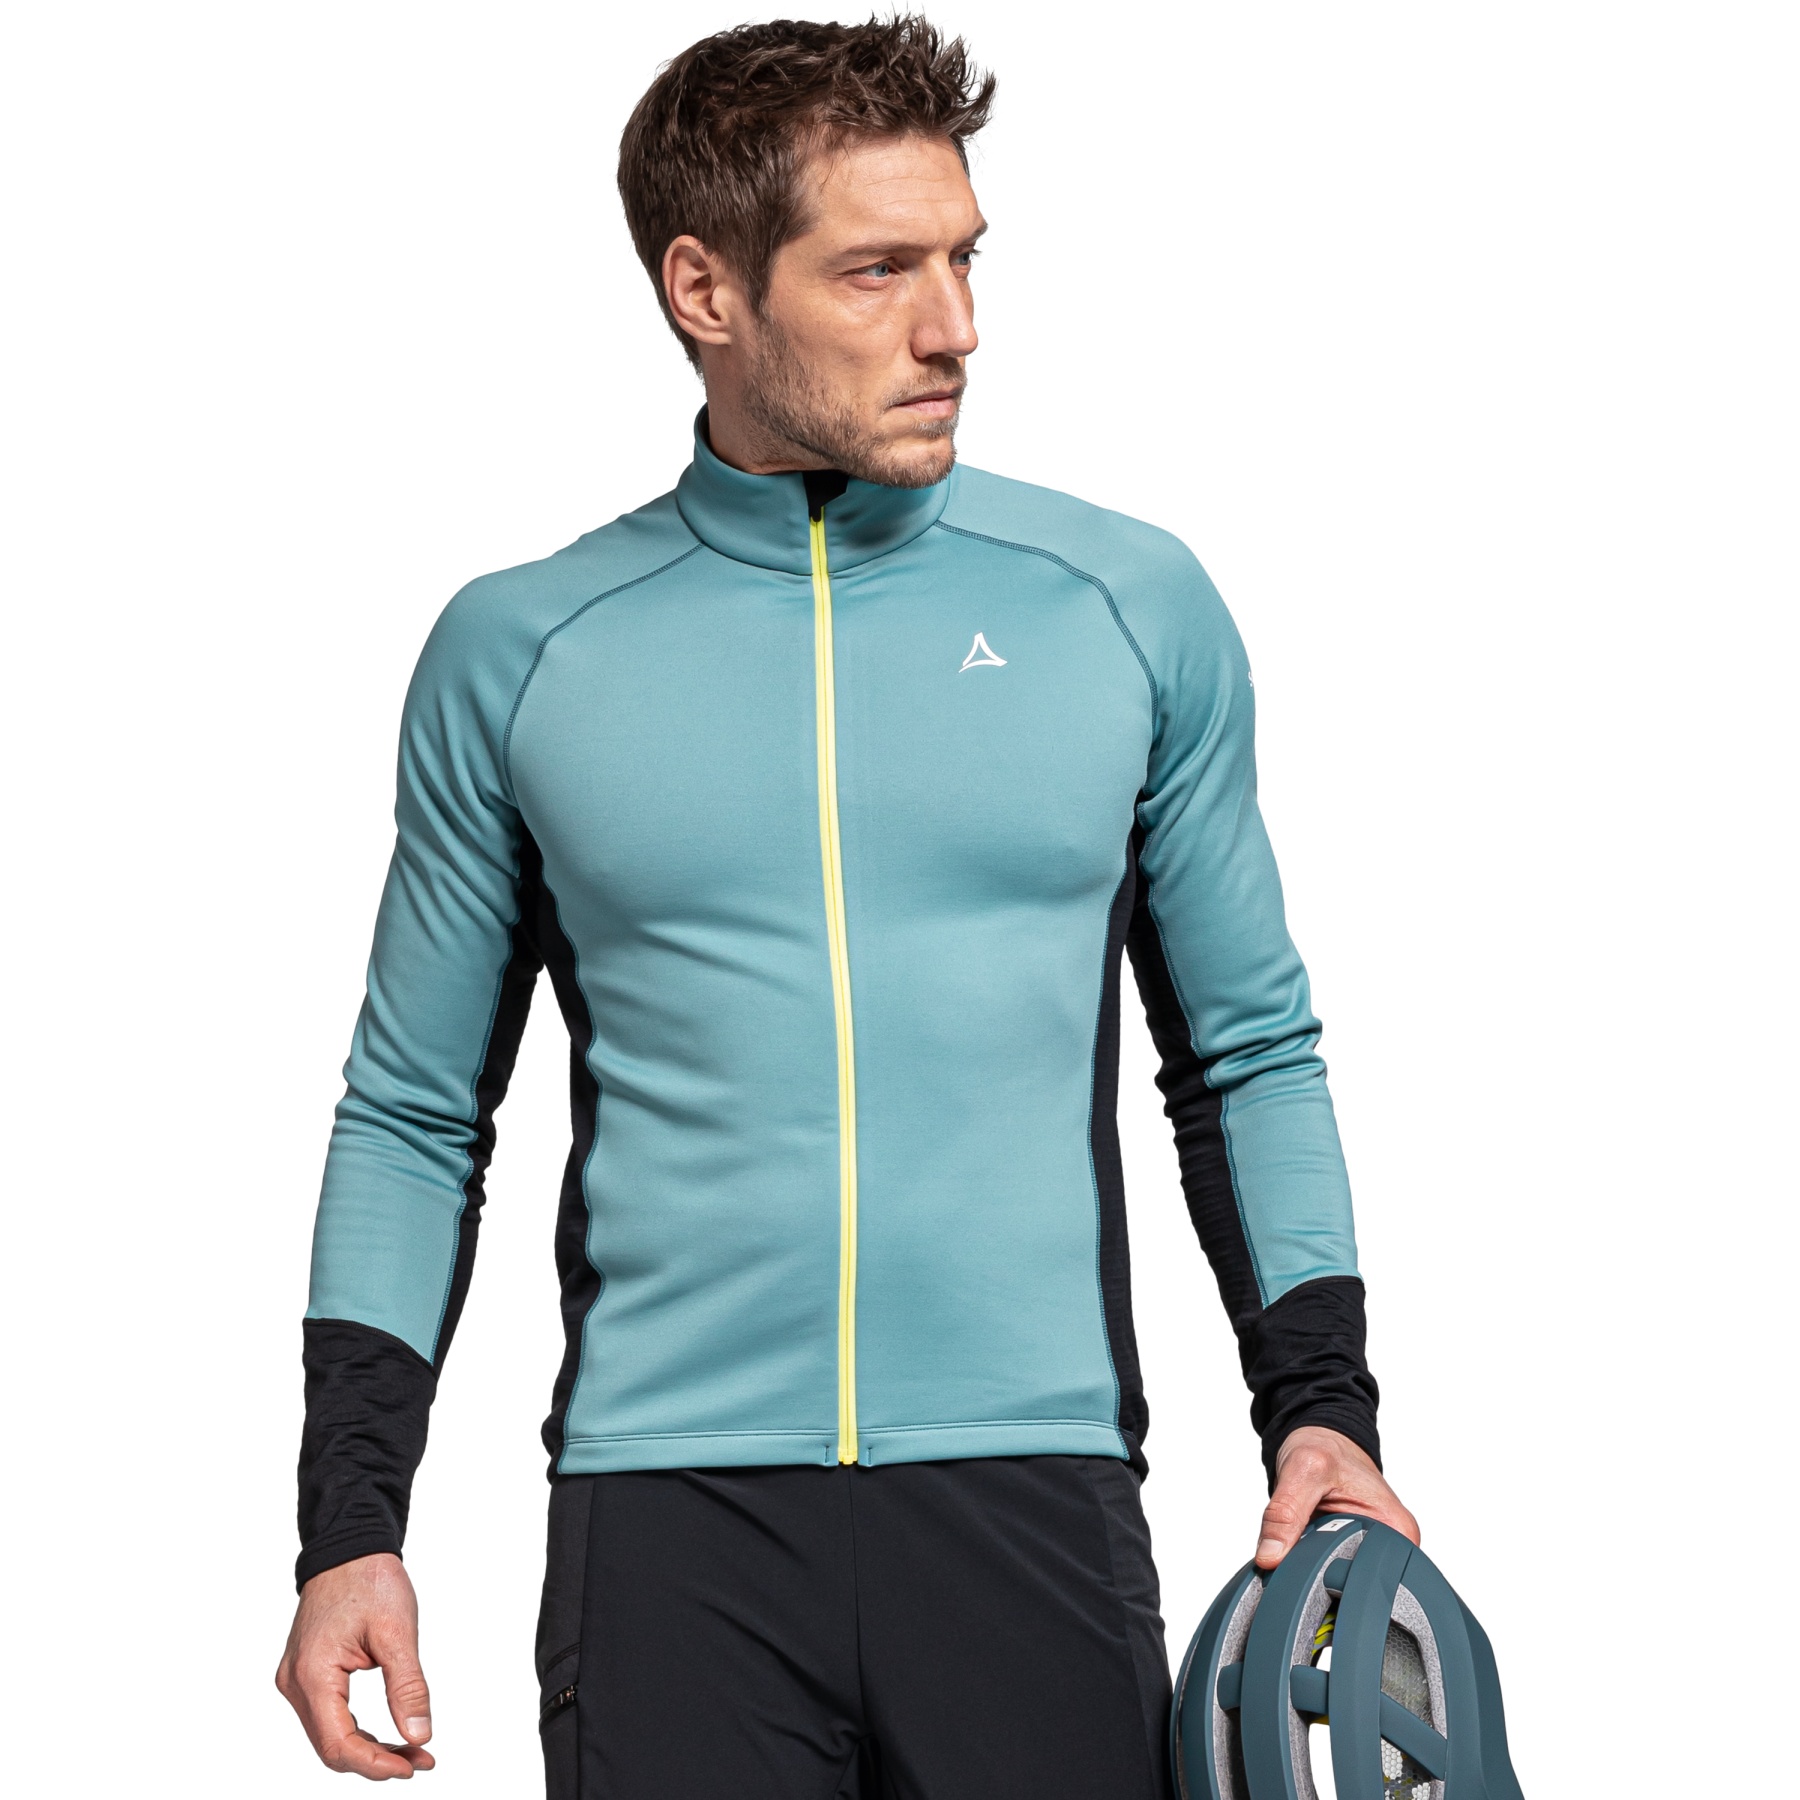 Picture of Schöffel Piambello Longsleeve Jersey - cloudy storm 8535